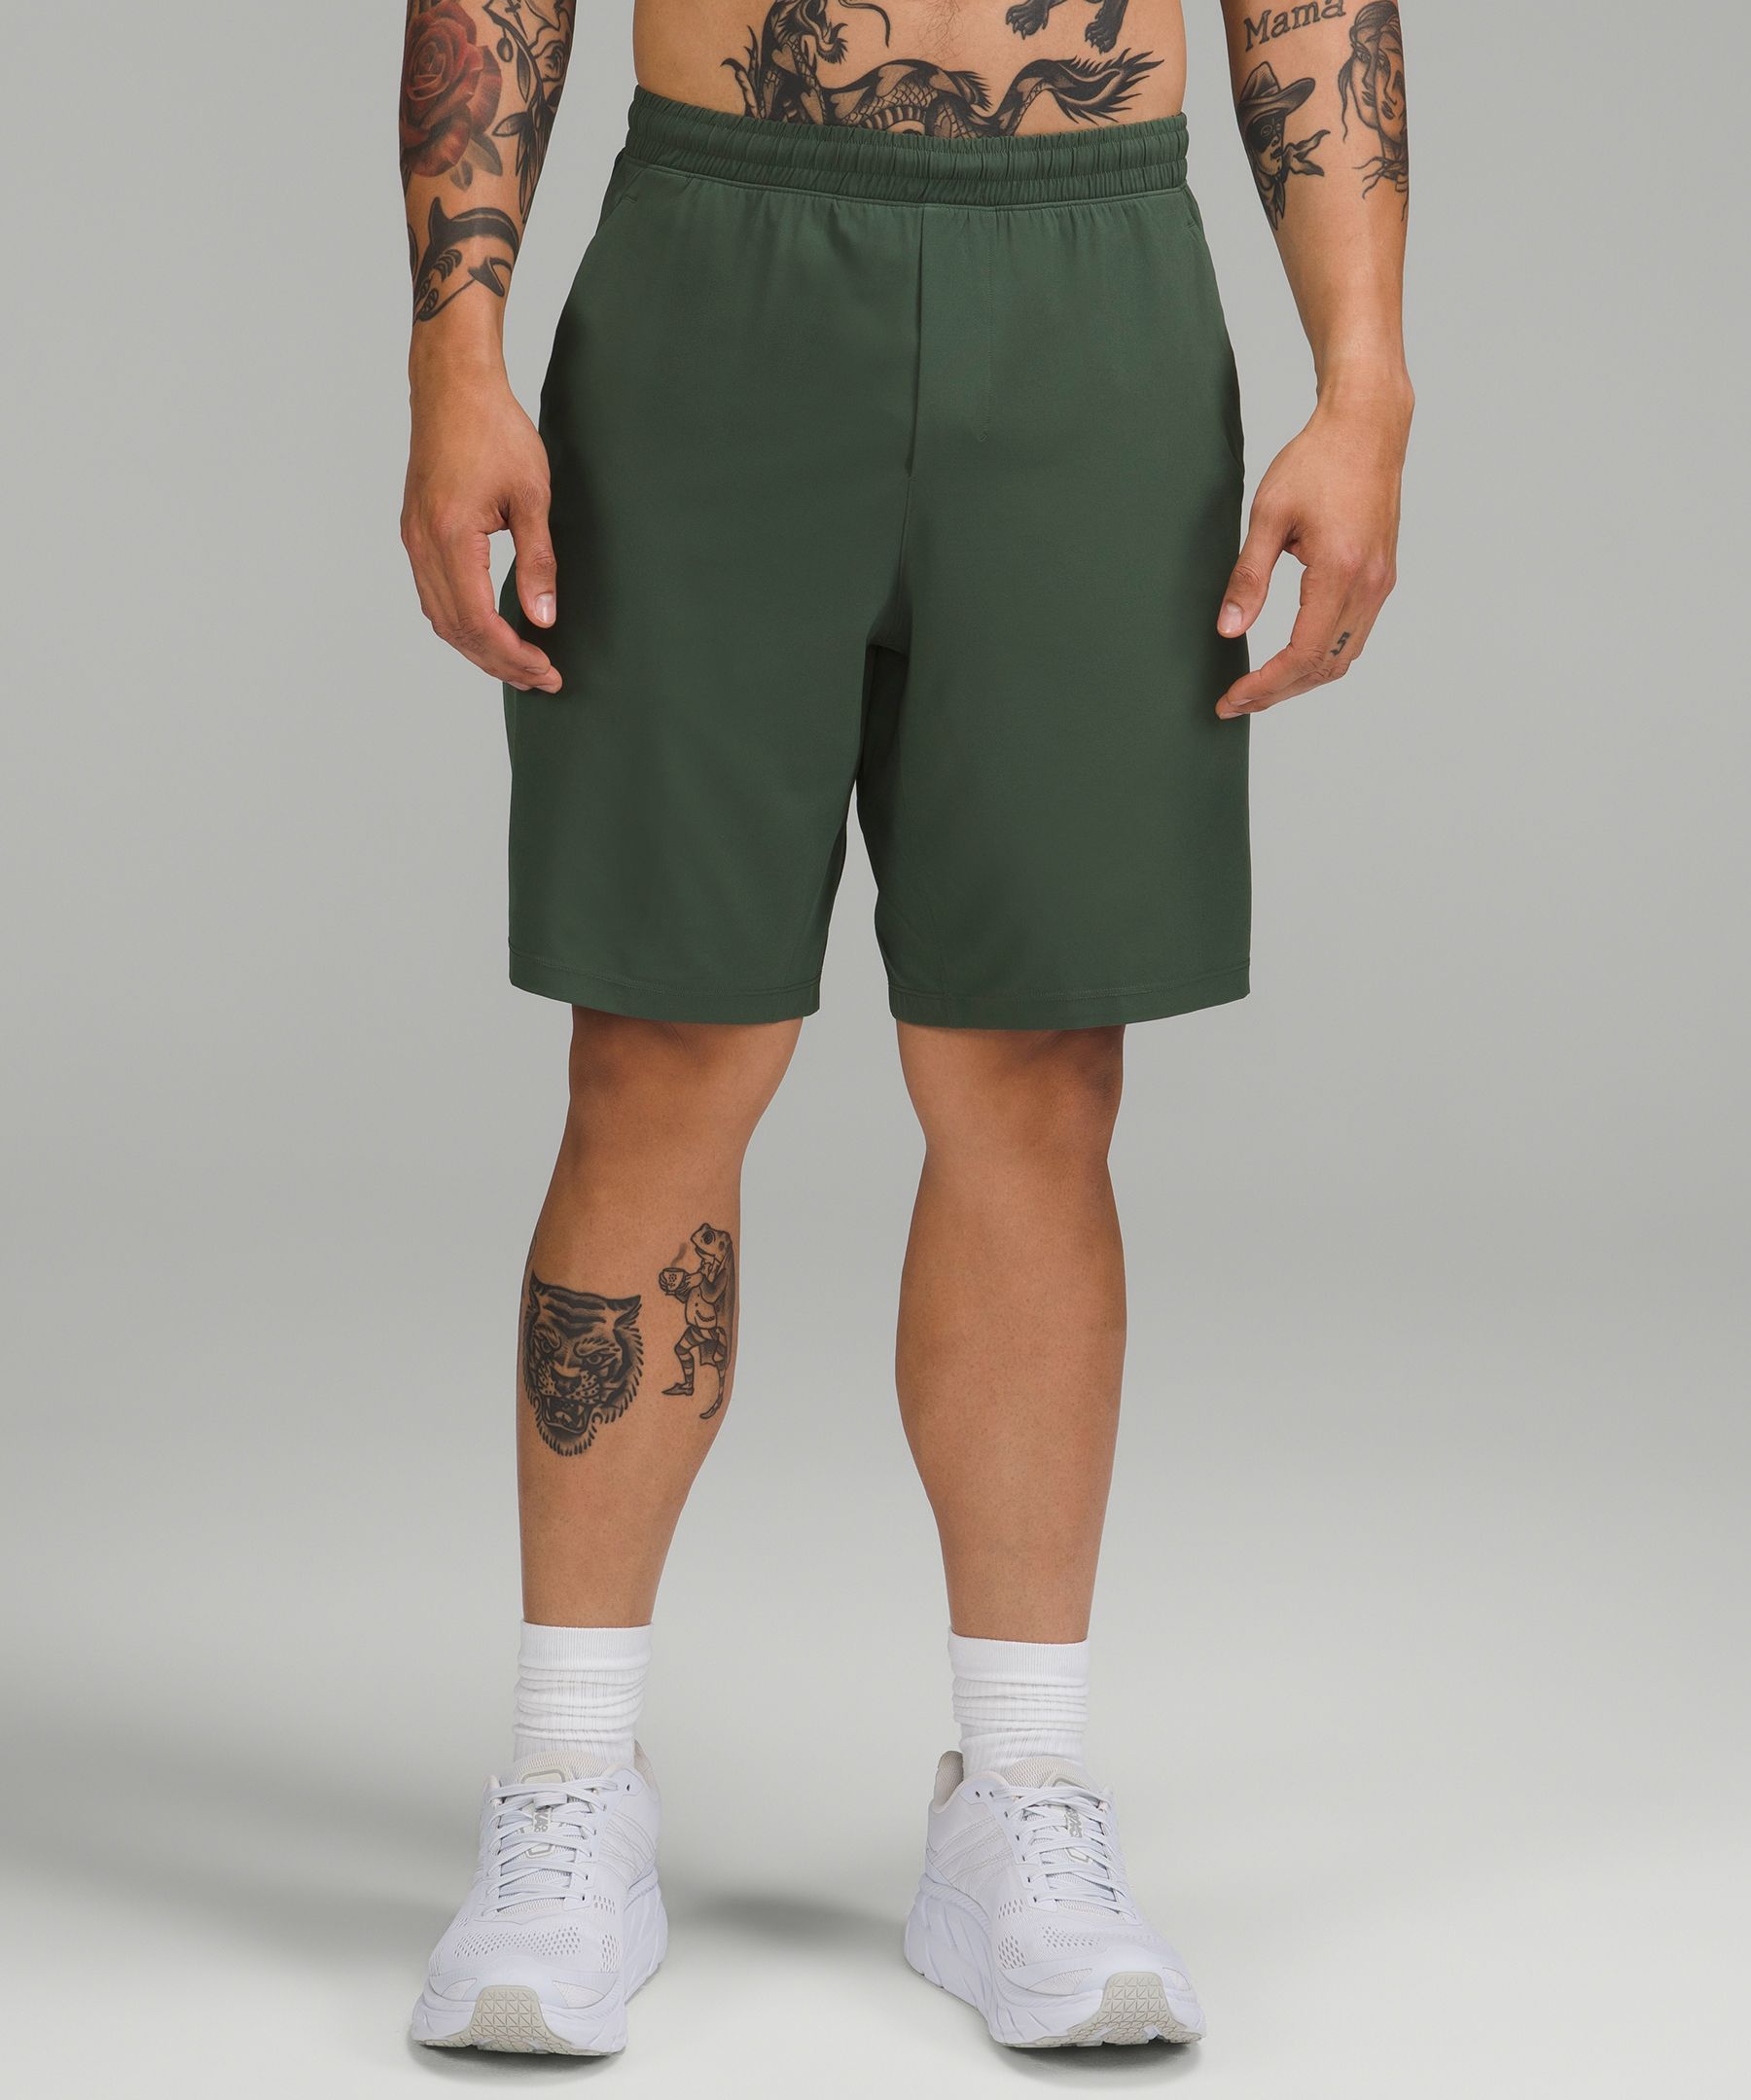 Lululemon Pace Breaker Lined Shorts 9" In Smoked Spruce